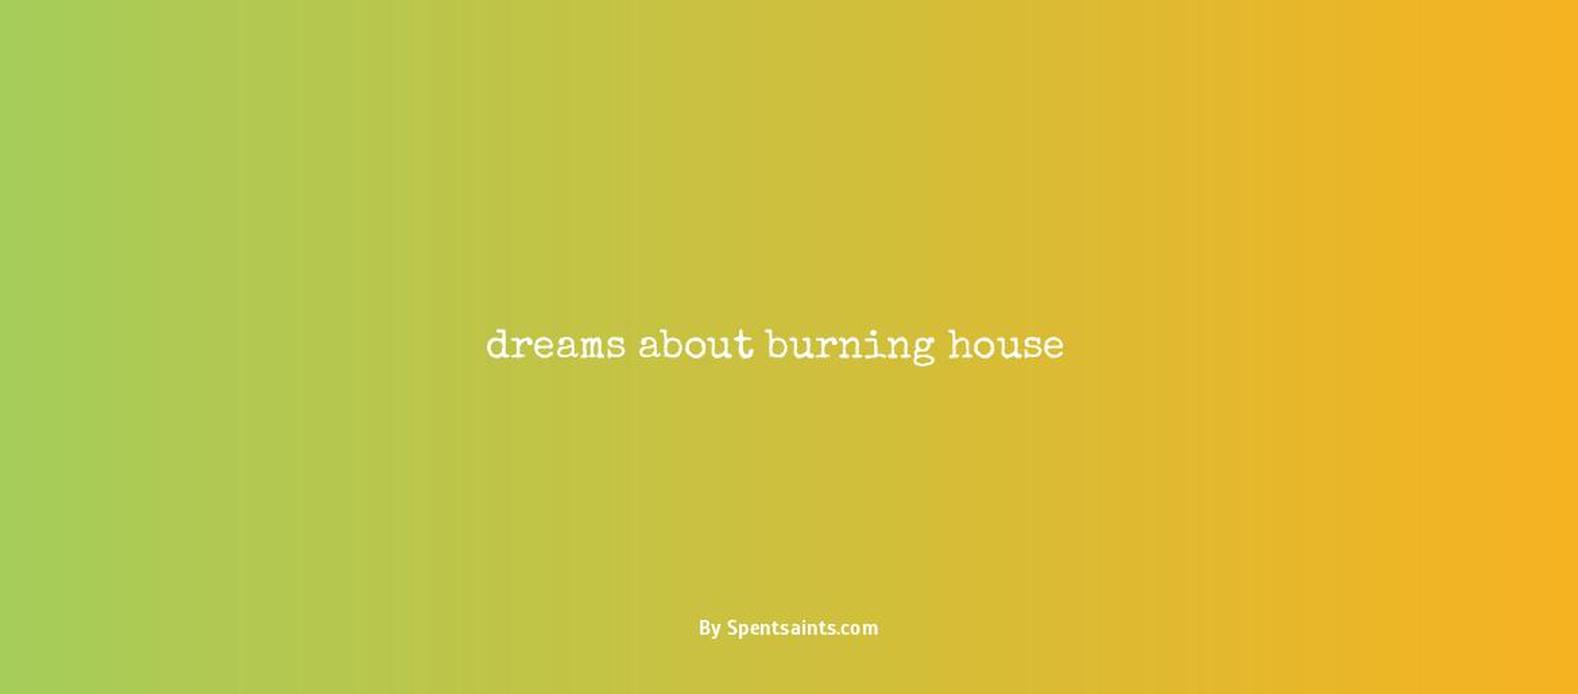 dreams about burning house